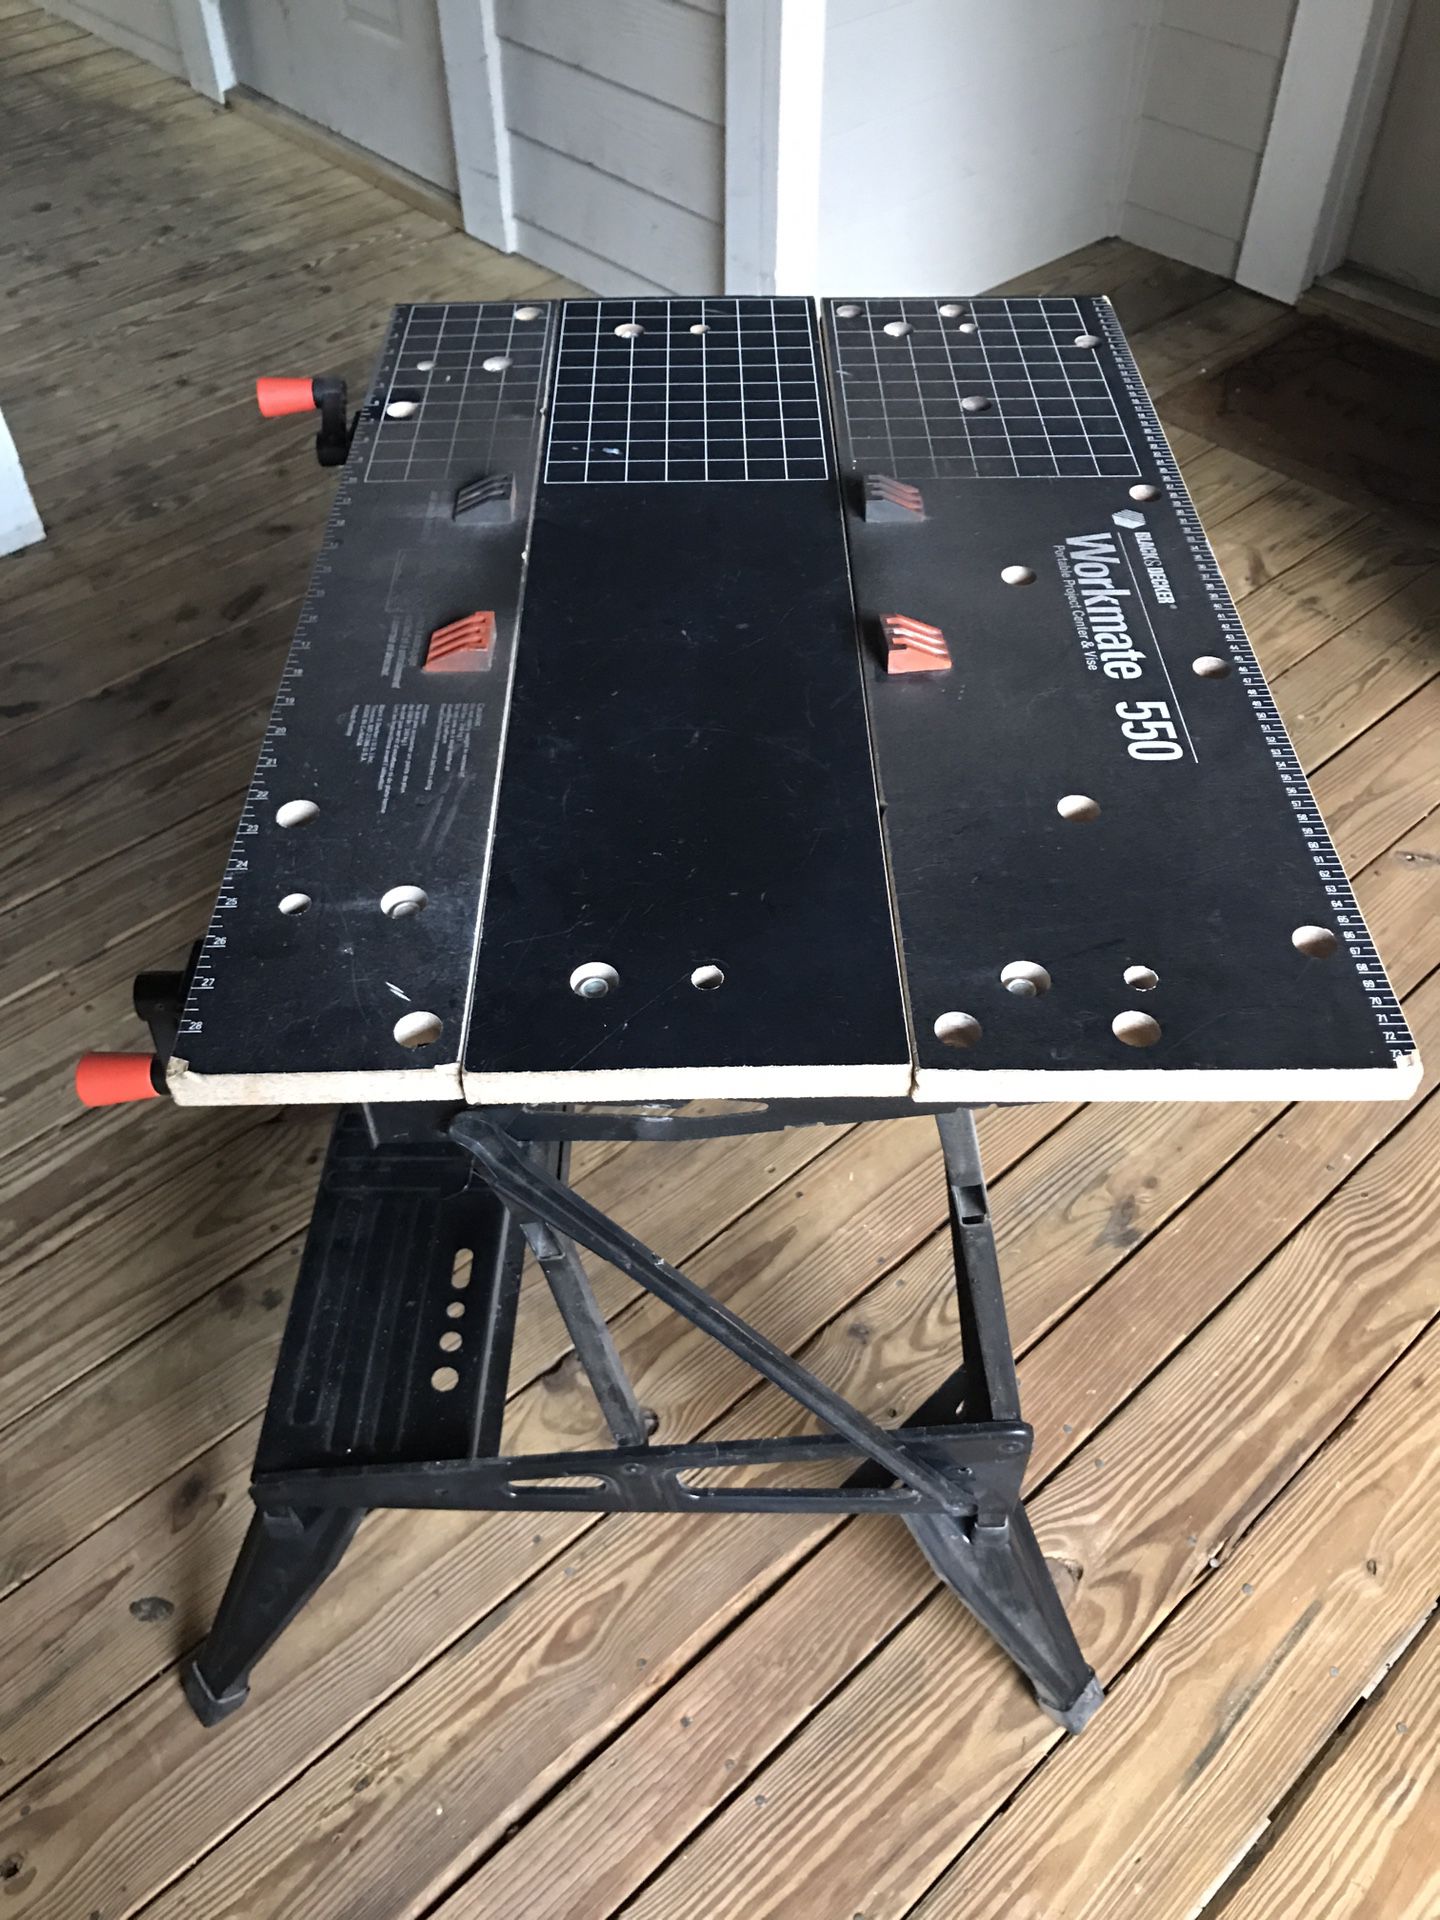 Black & Decker Workmate Plus Portable Workbench Holds up to 550 pounds  Model 79-042 for Sale in Fremont, CA - OfferUp